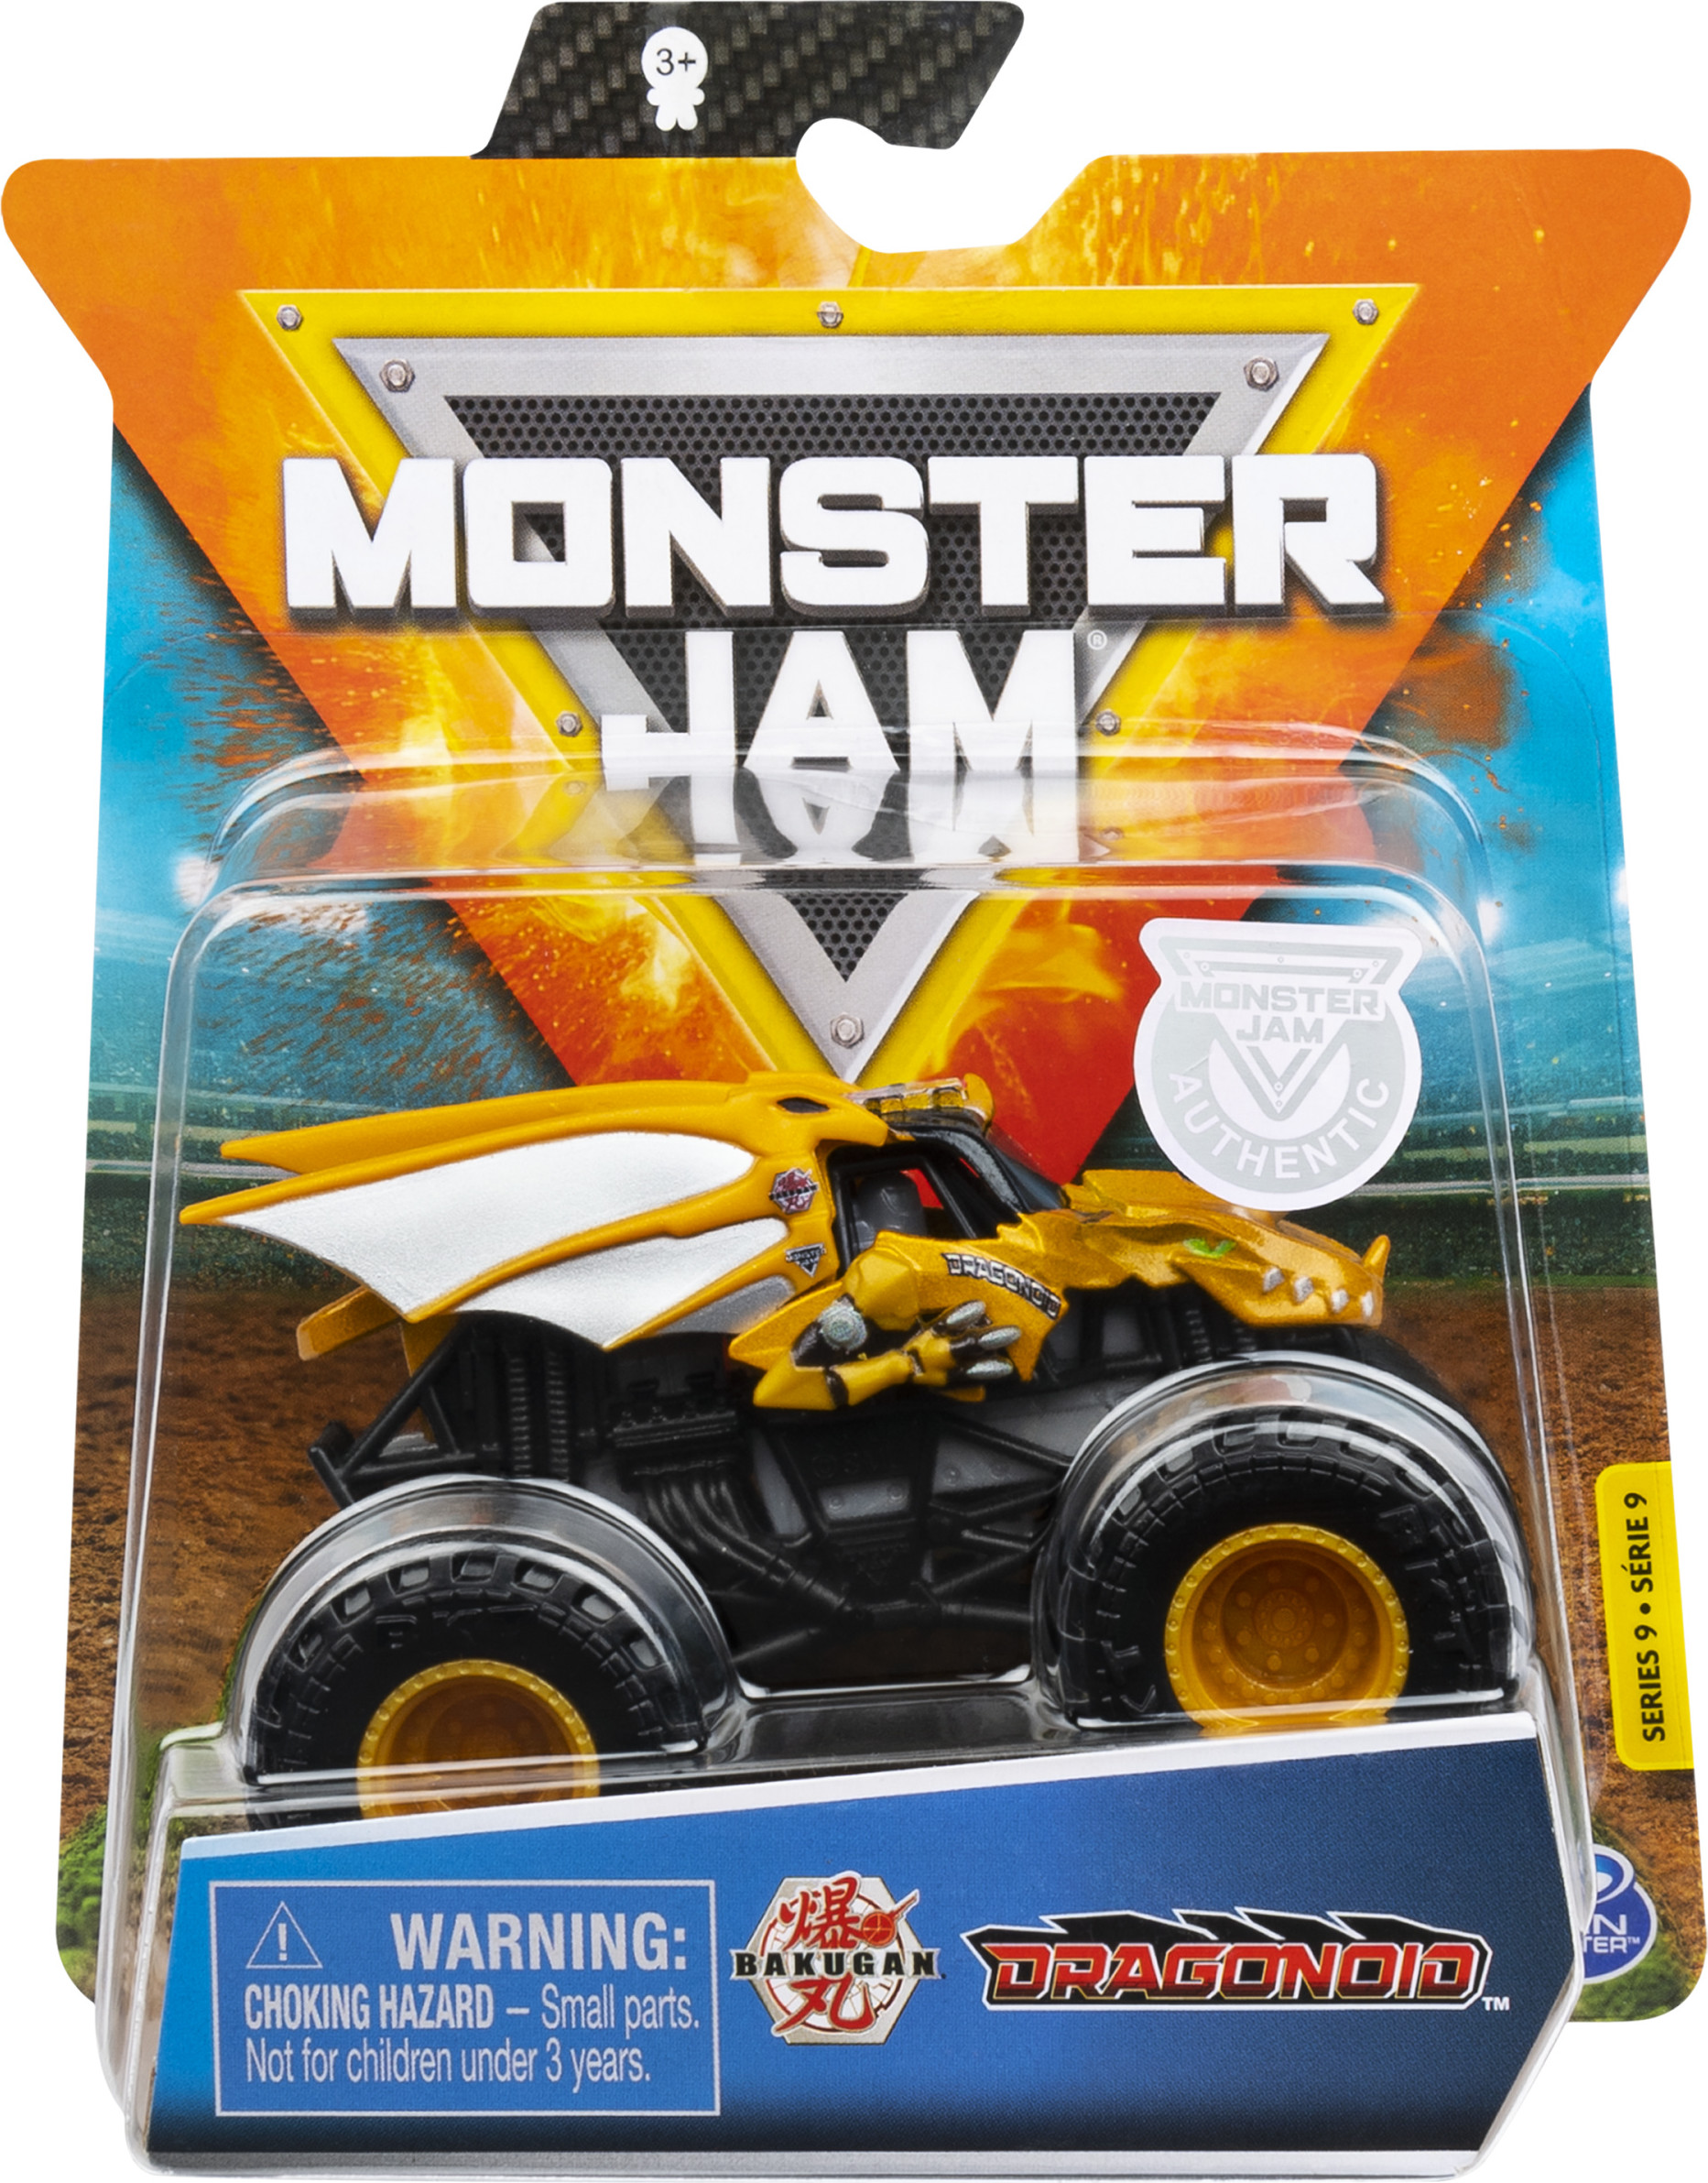 Monster Jam, Official 1:64 Scale Die-Cast Monster Truck (Styles May Vary) - image 3 of 7